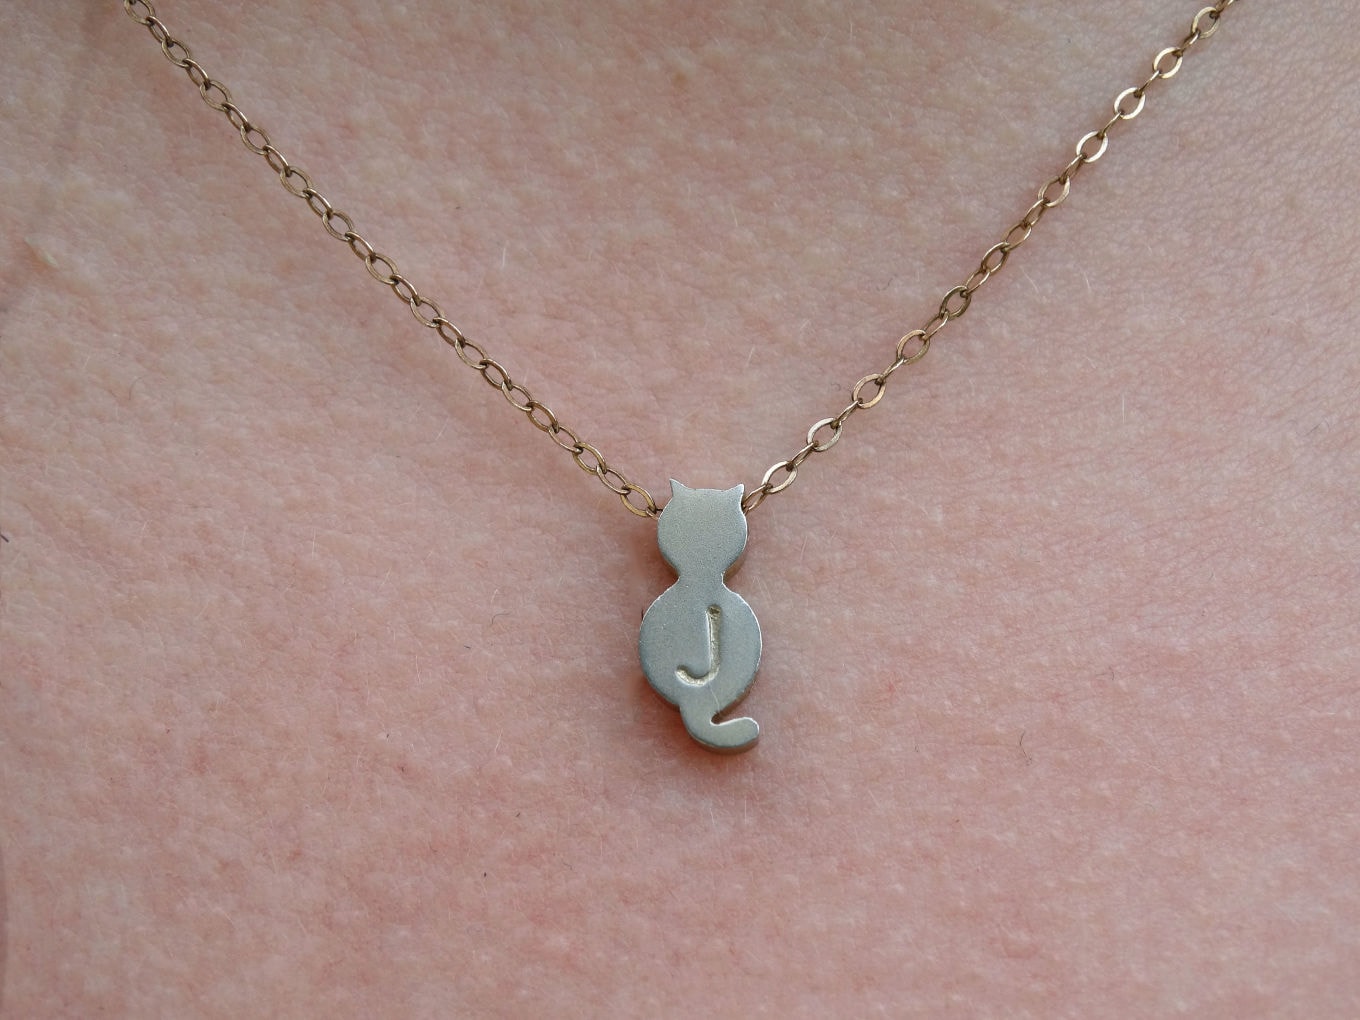 Cat necklace with a J on it